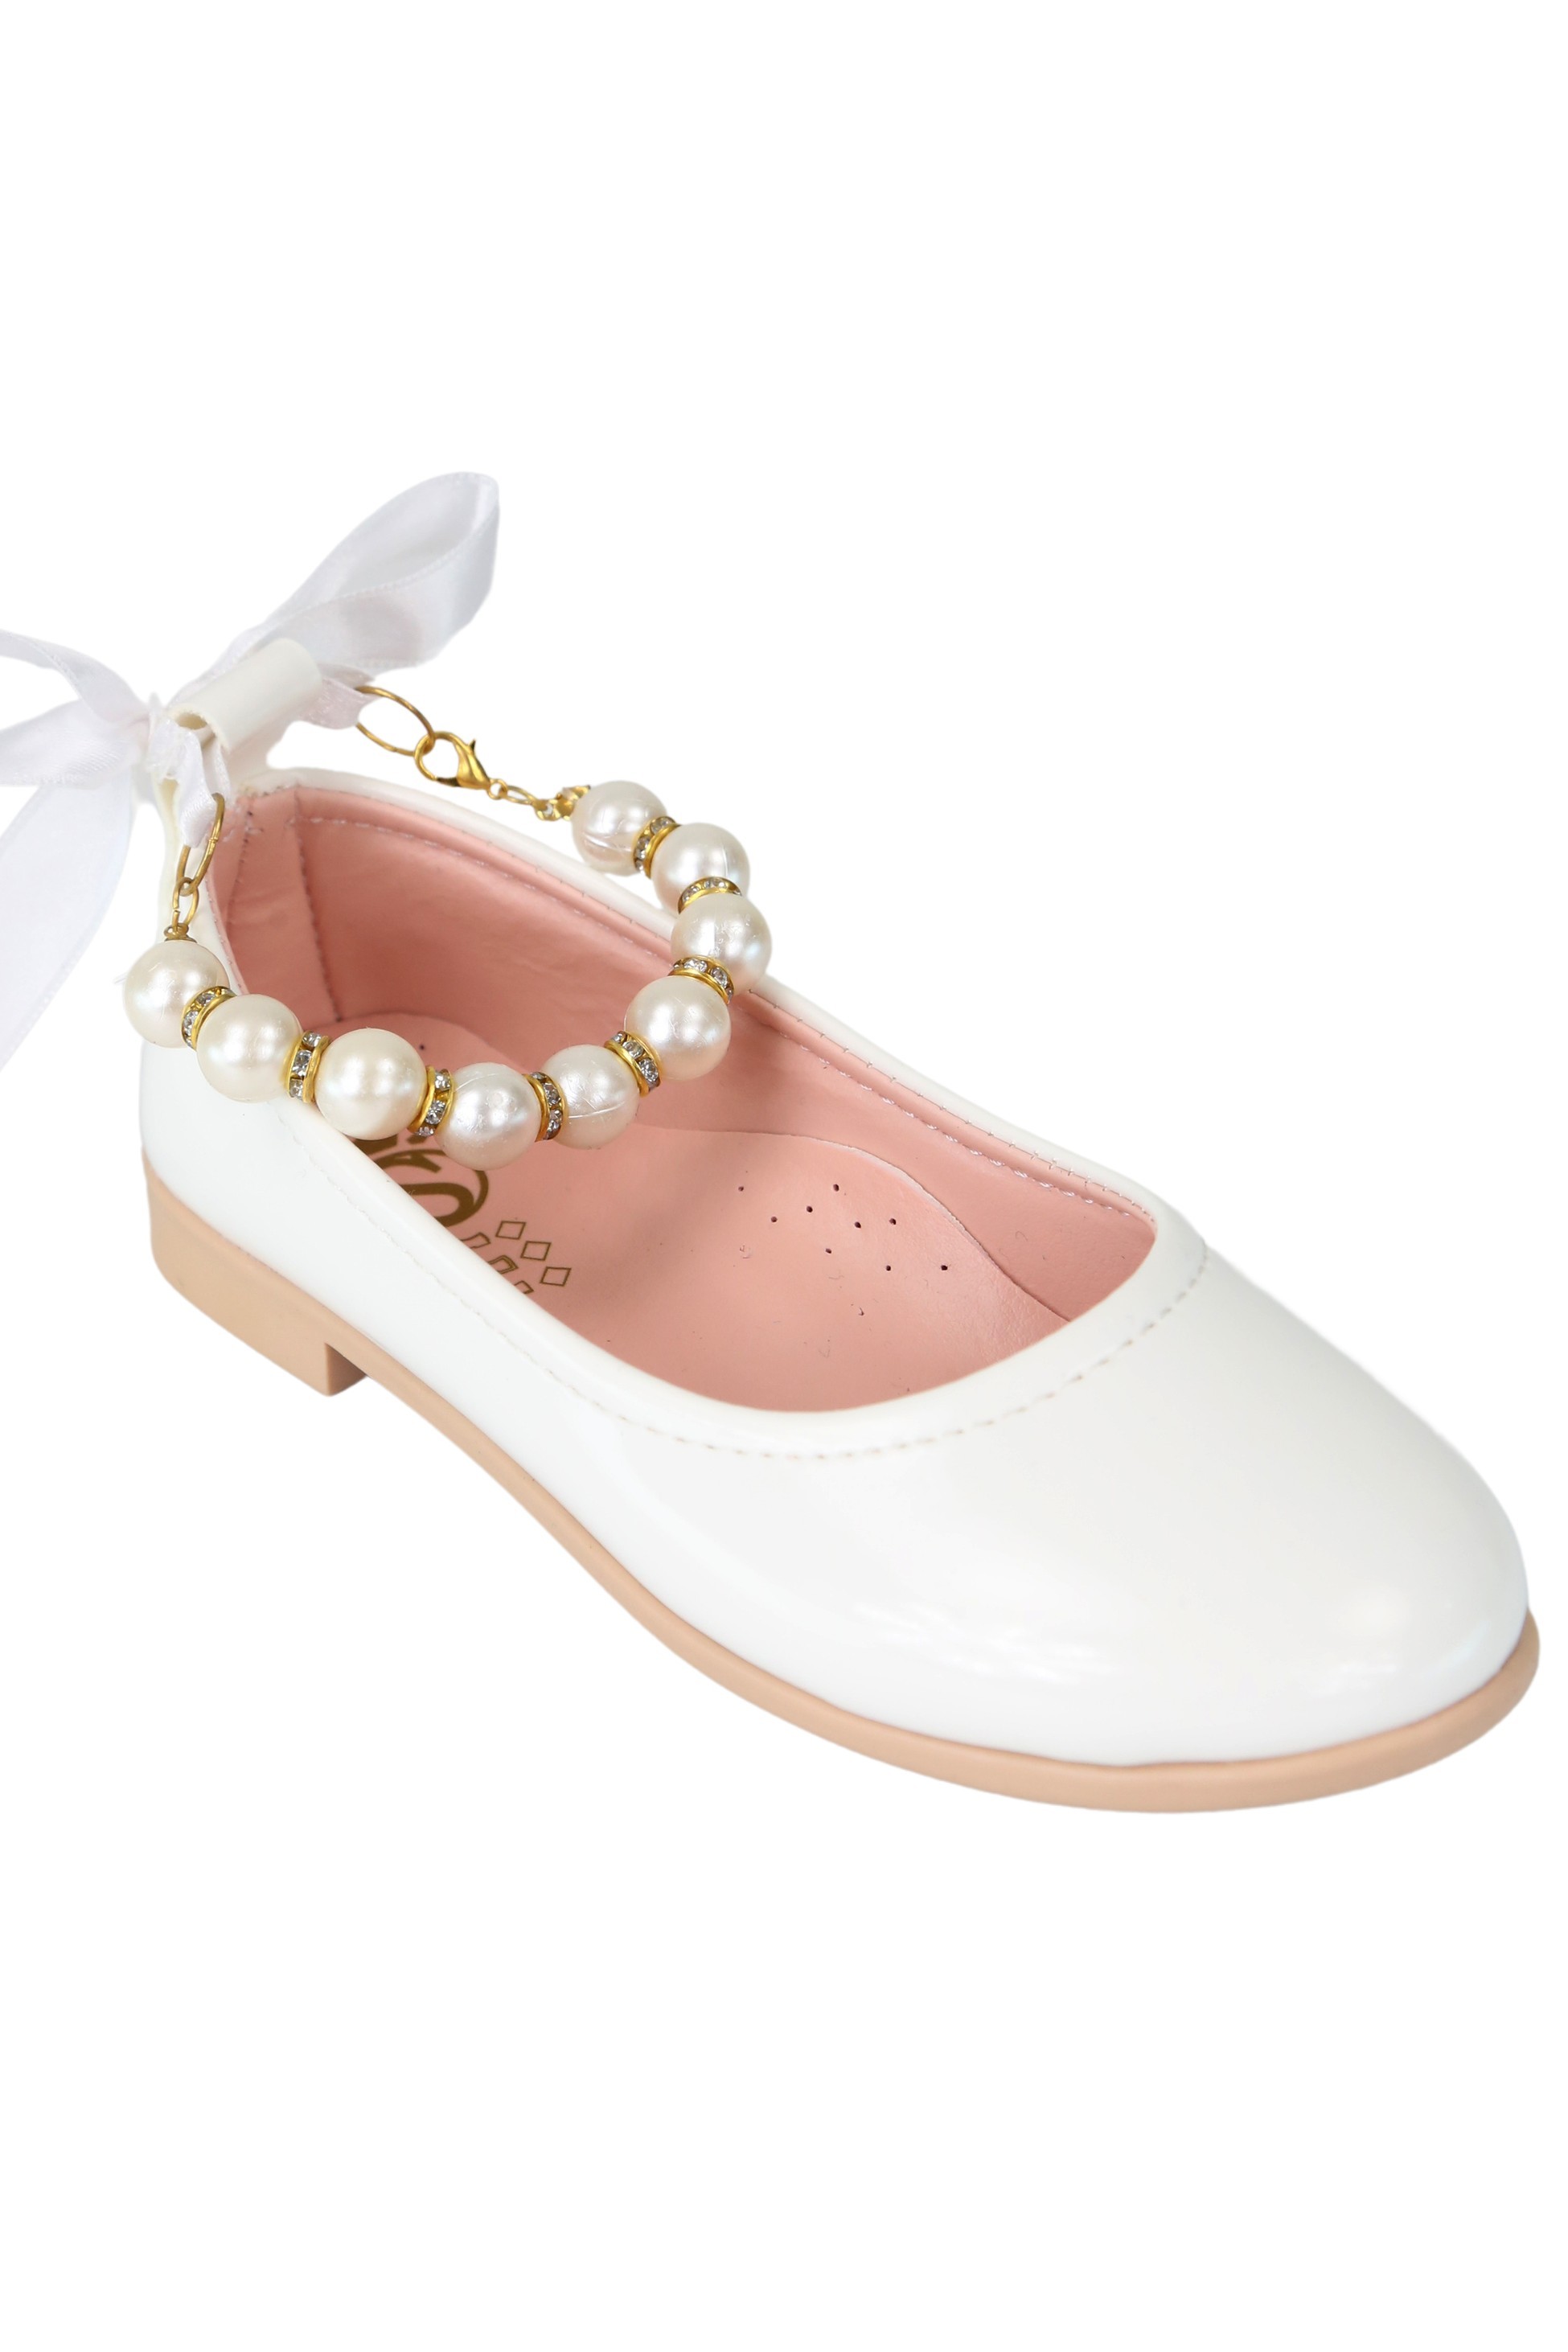 Girls Pearls & Ribbon Slip on Patent Mary Jane Shoes - TEAN - White